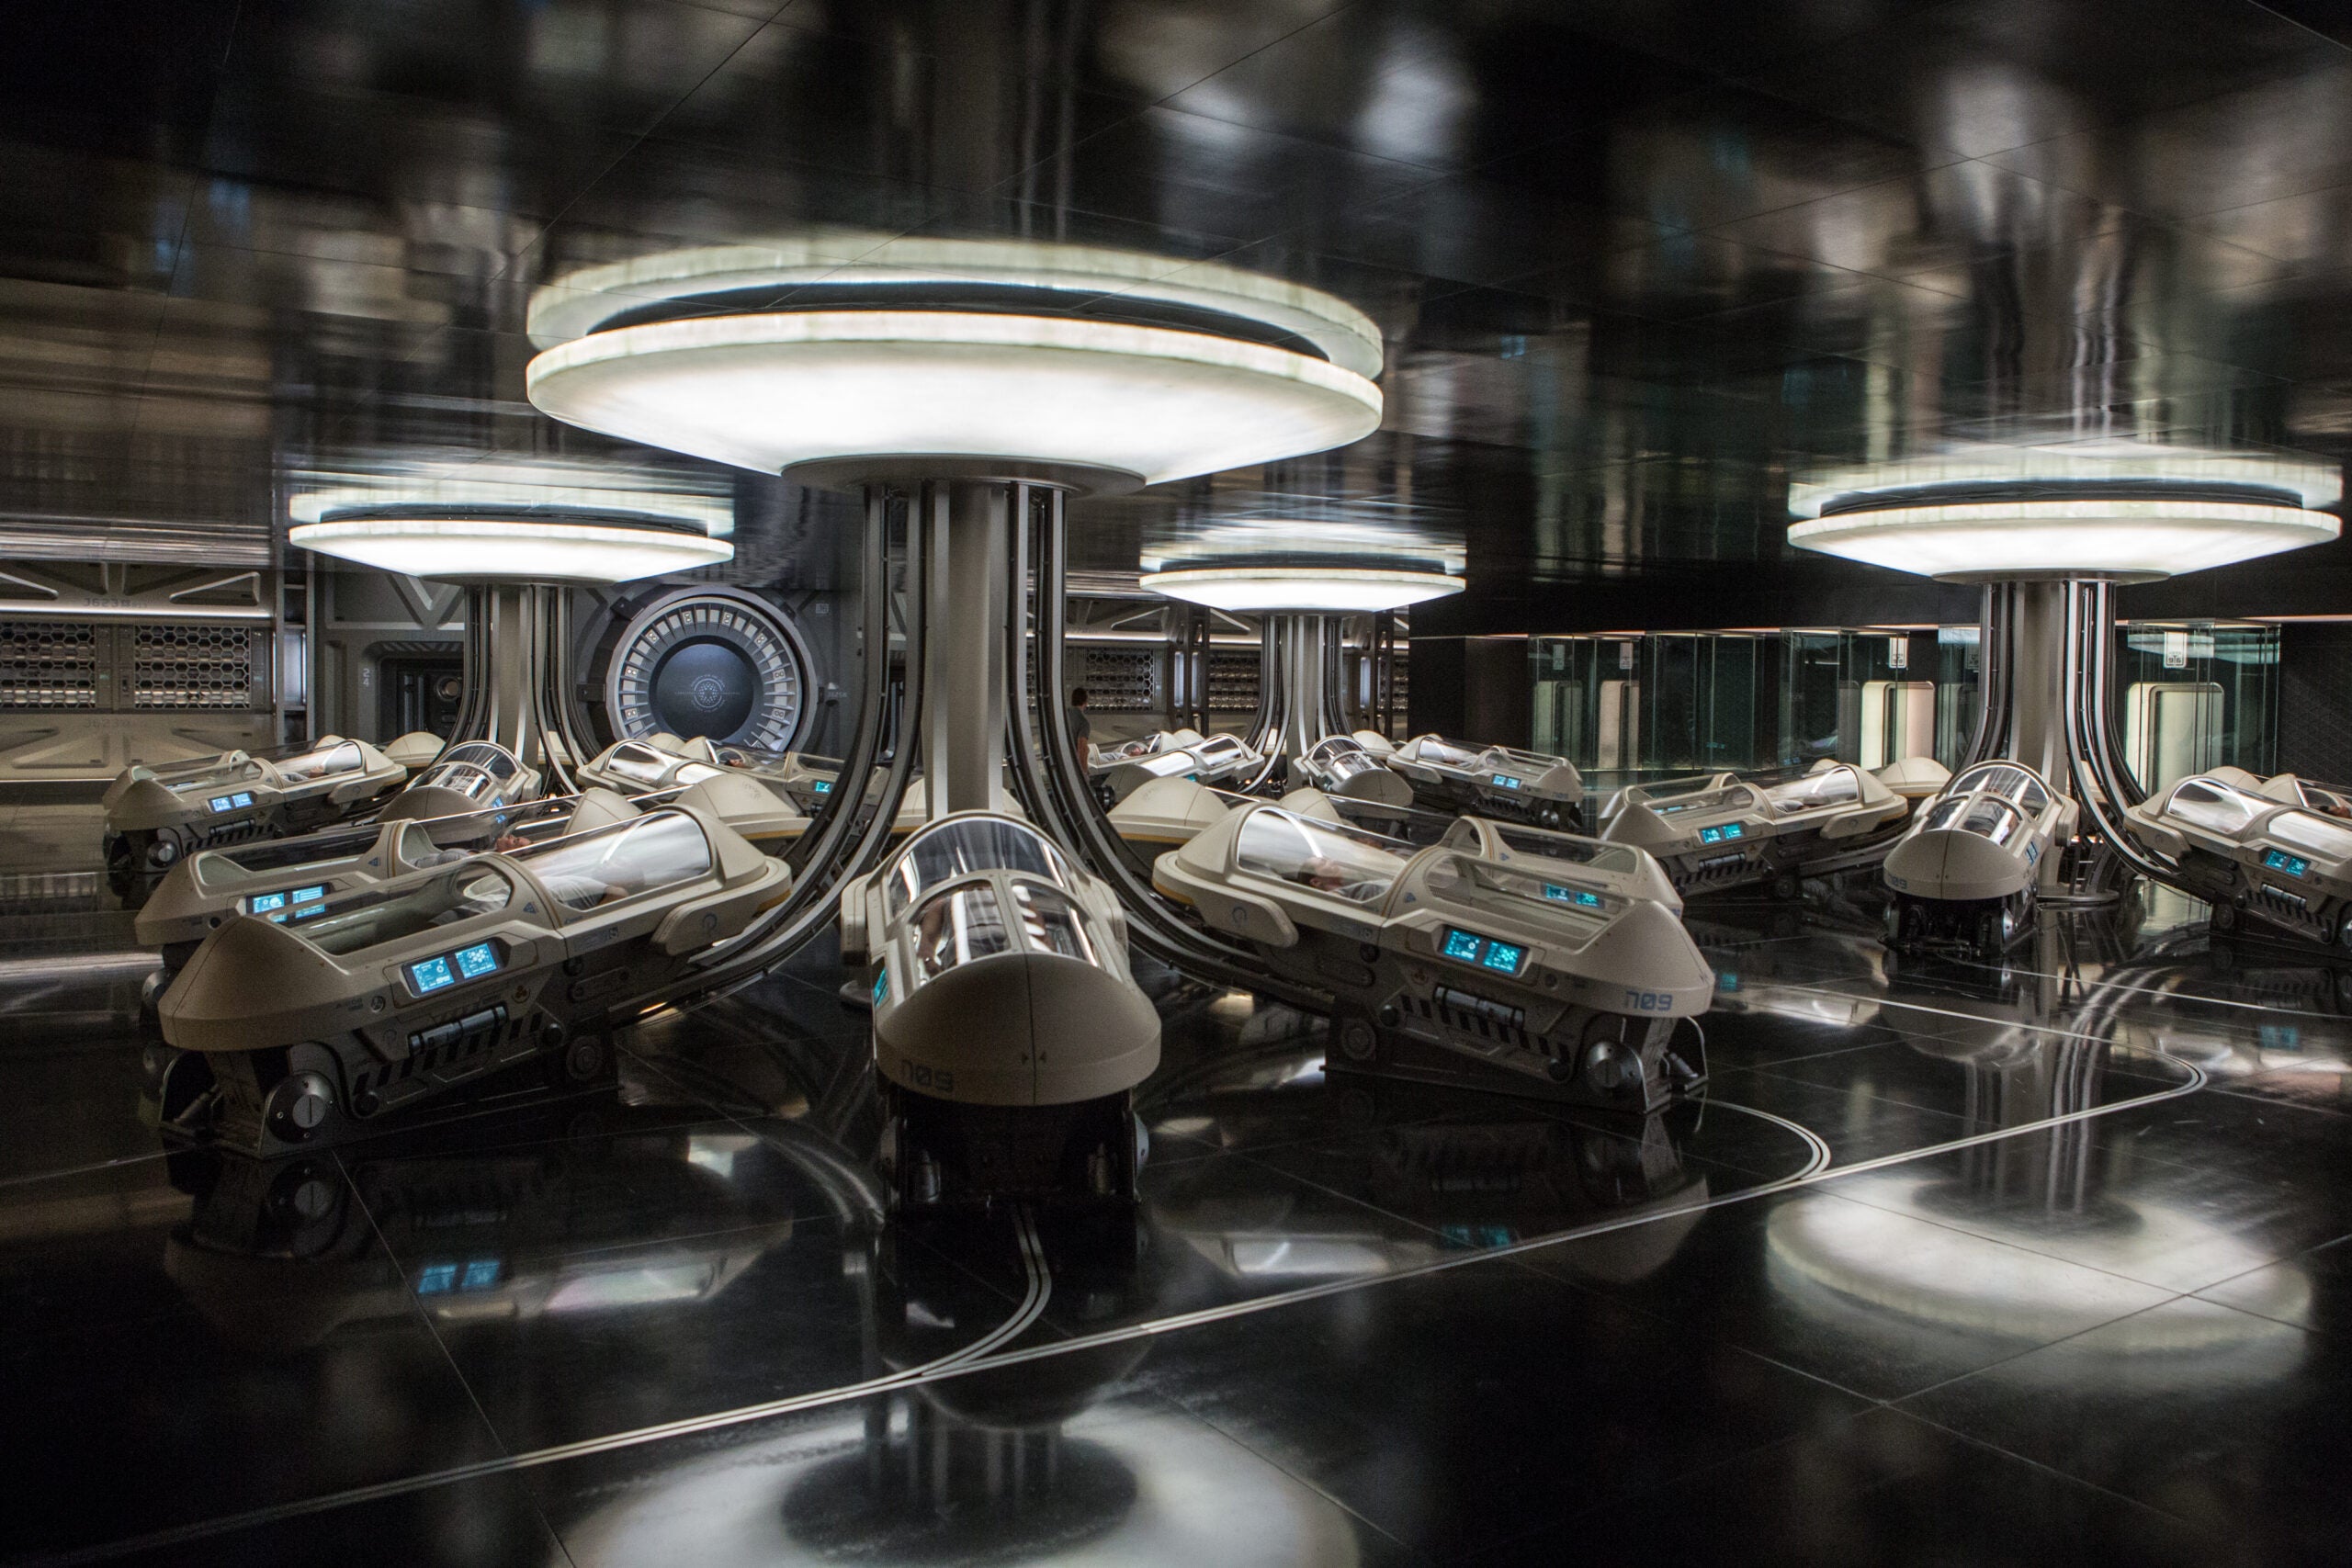 The hibernation science in 'Passengers' is not far from reality